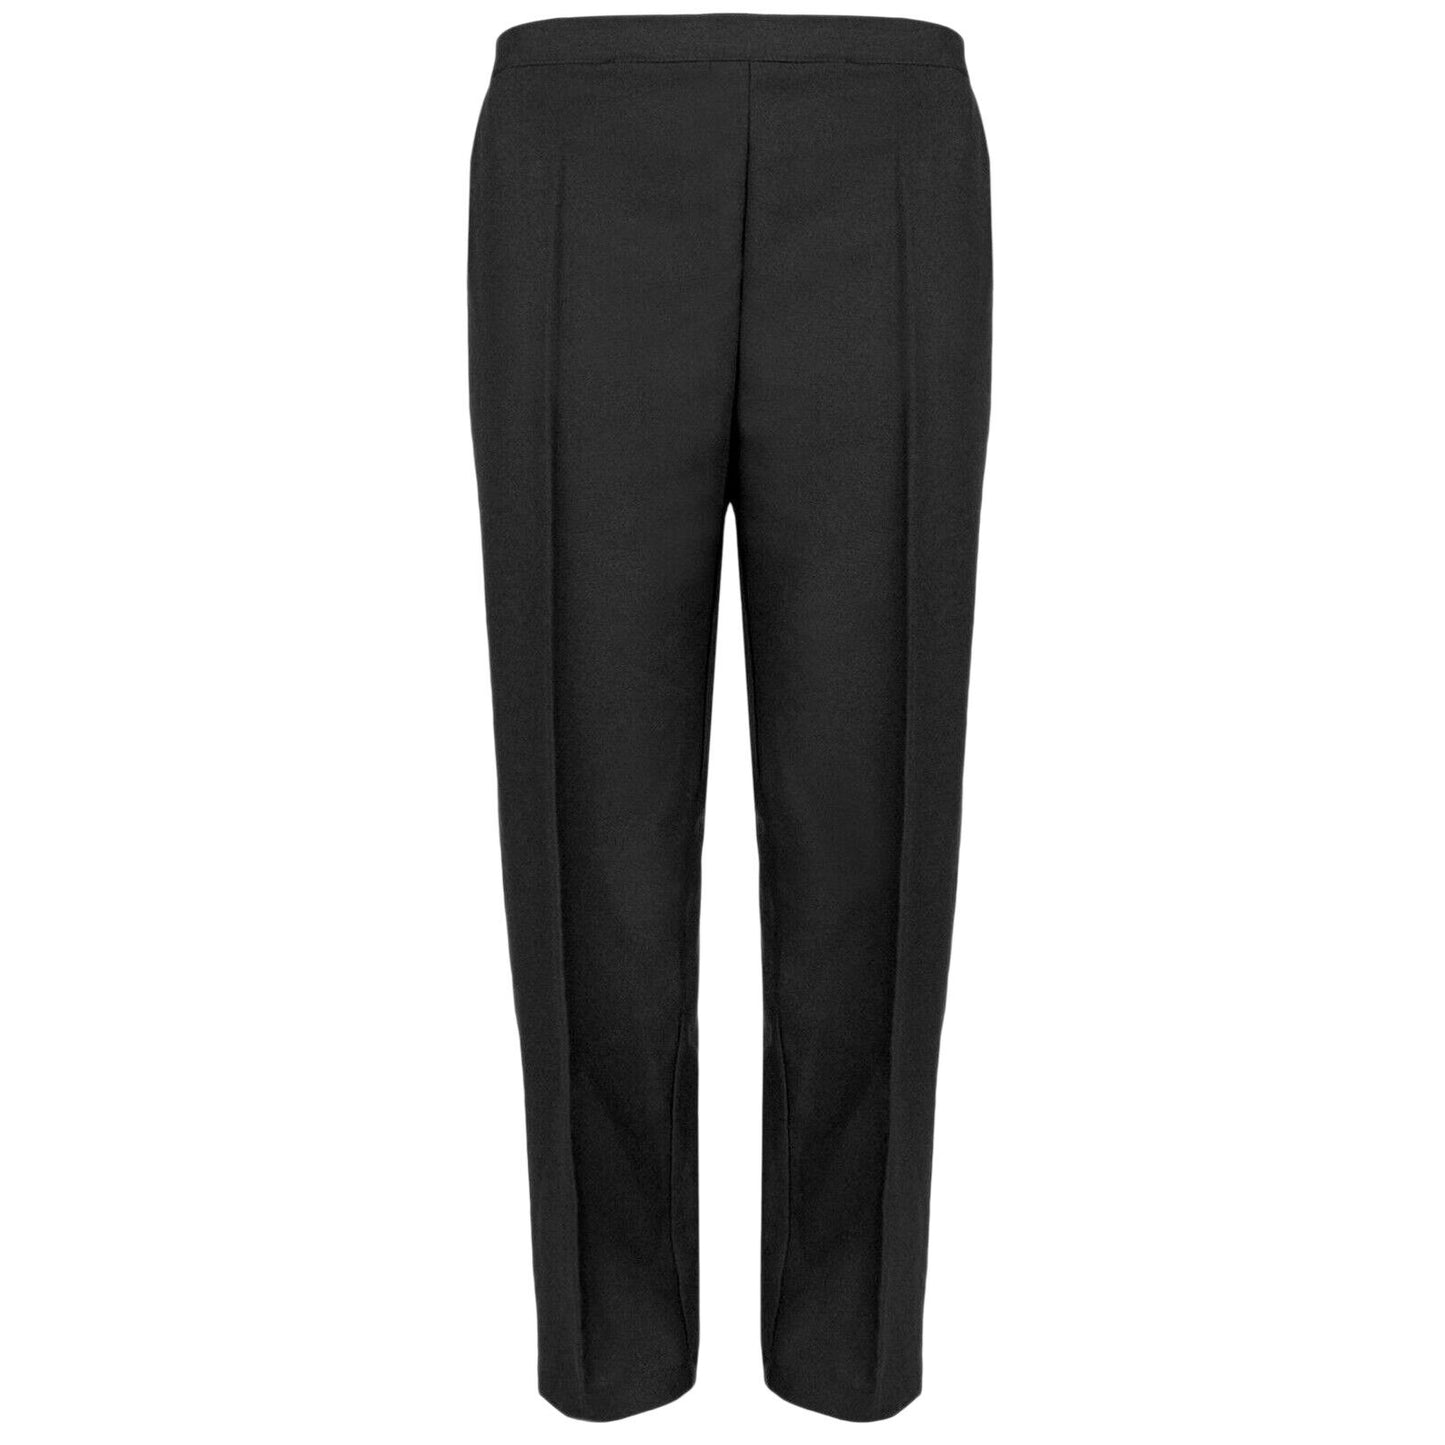 PACK OF 2 LADIES WOMENS HALF ELASTICATED WAIST TROUSERS WITH POCKETS PLUS SIZE 16 to 20